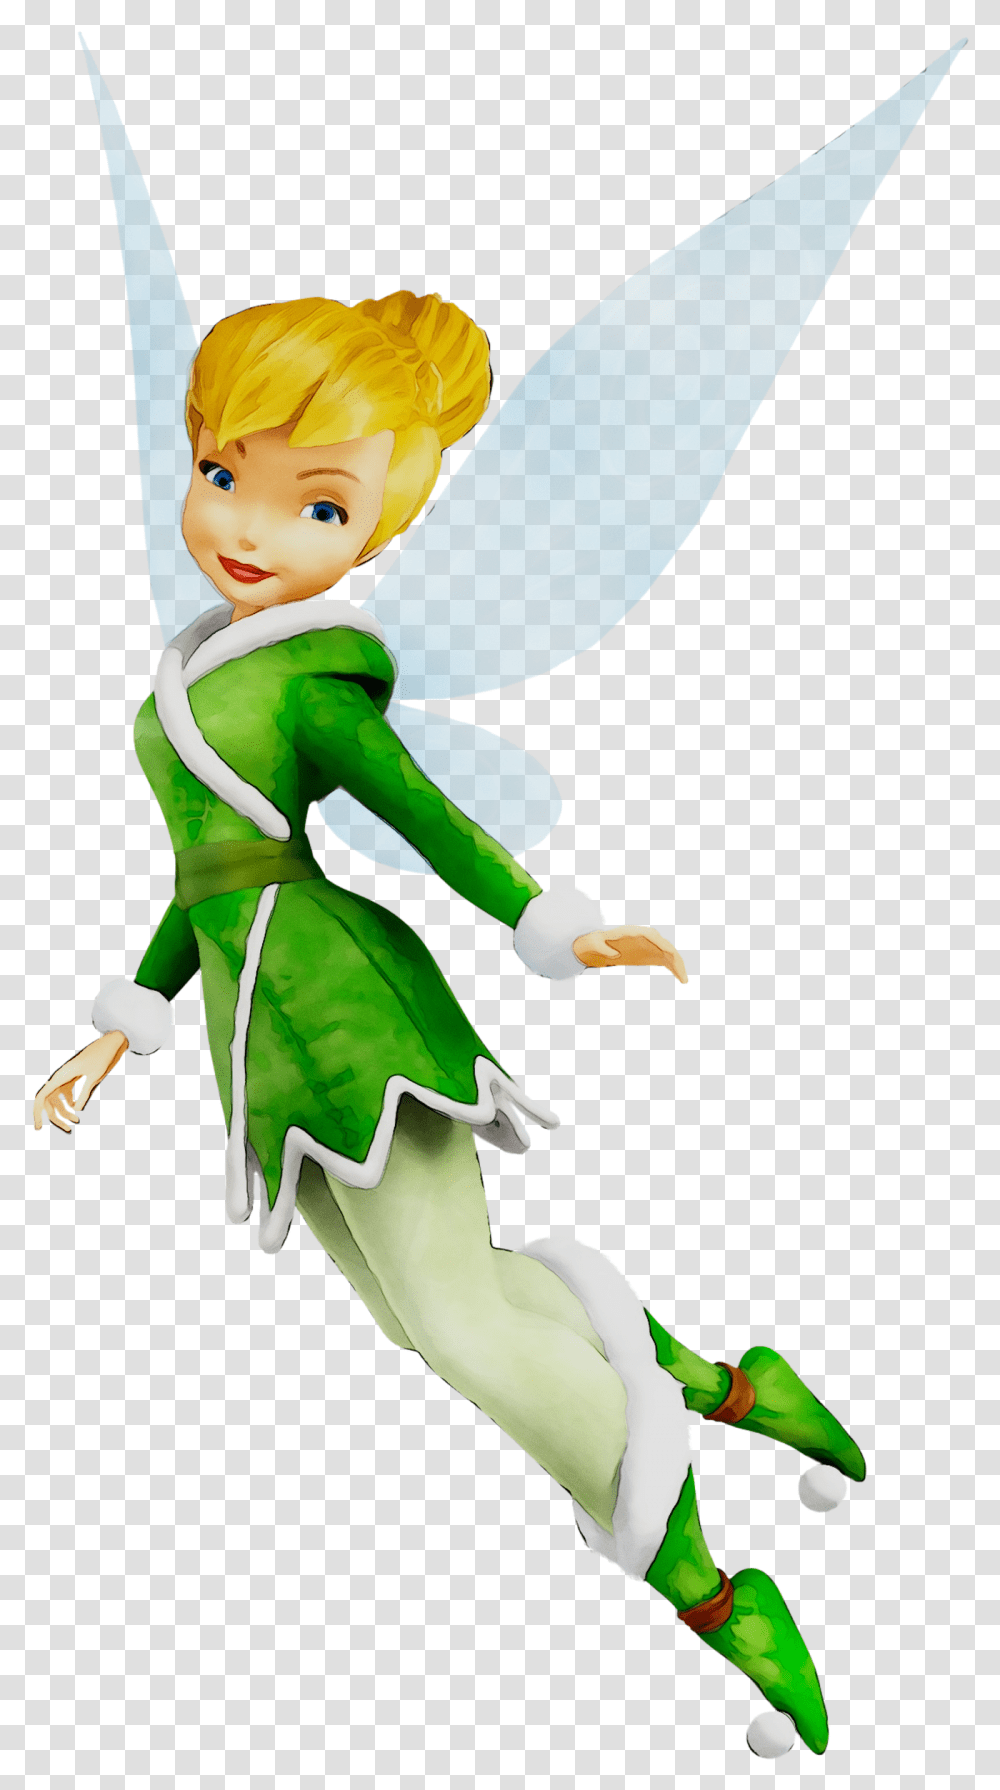 Plants Fairy Figurine Illustration Graphics Free Cartoon Fairy Images Hd, Elf, Person, Human, Toy Transparent Png